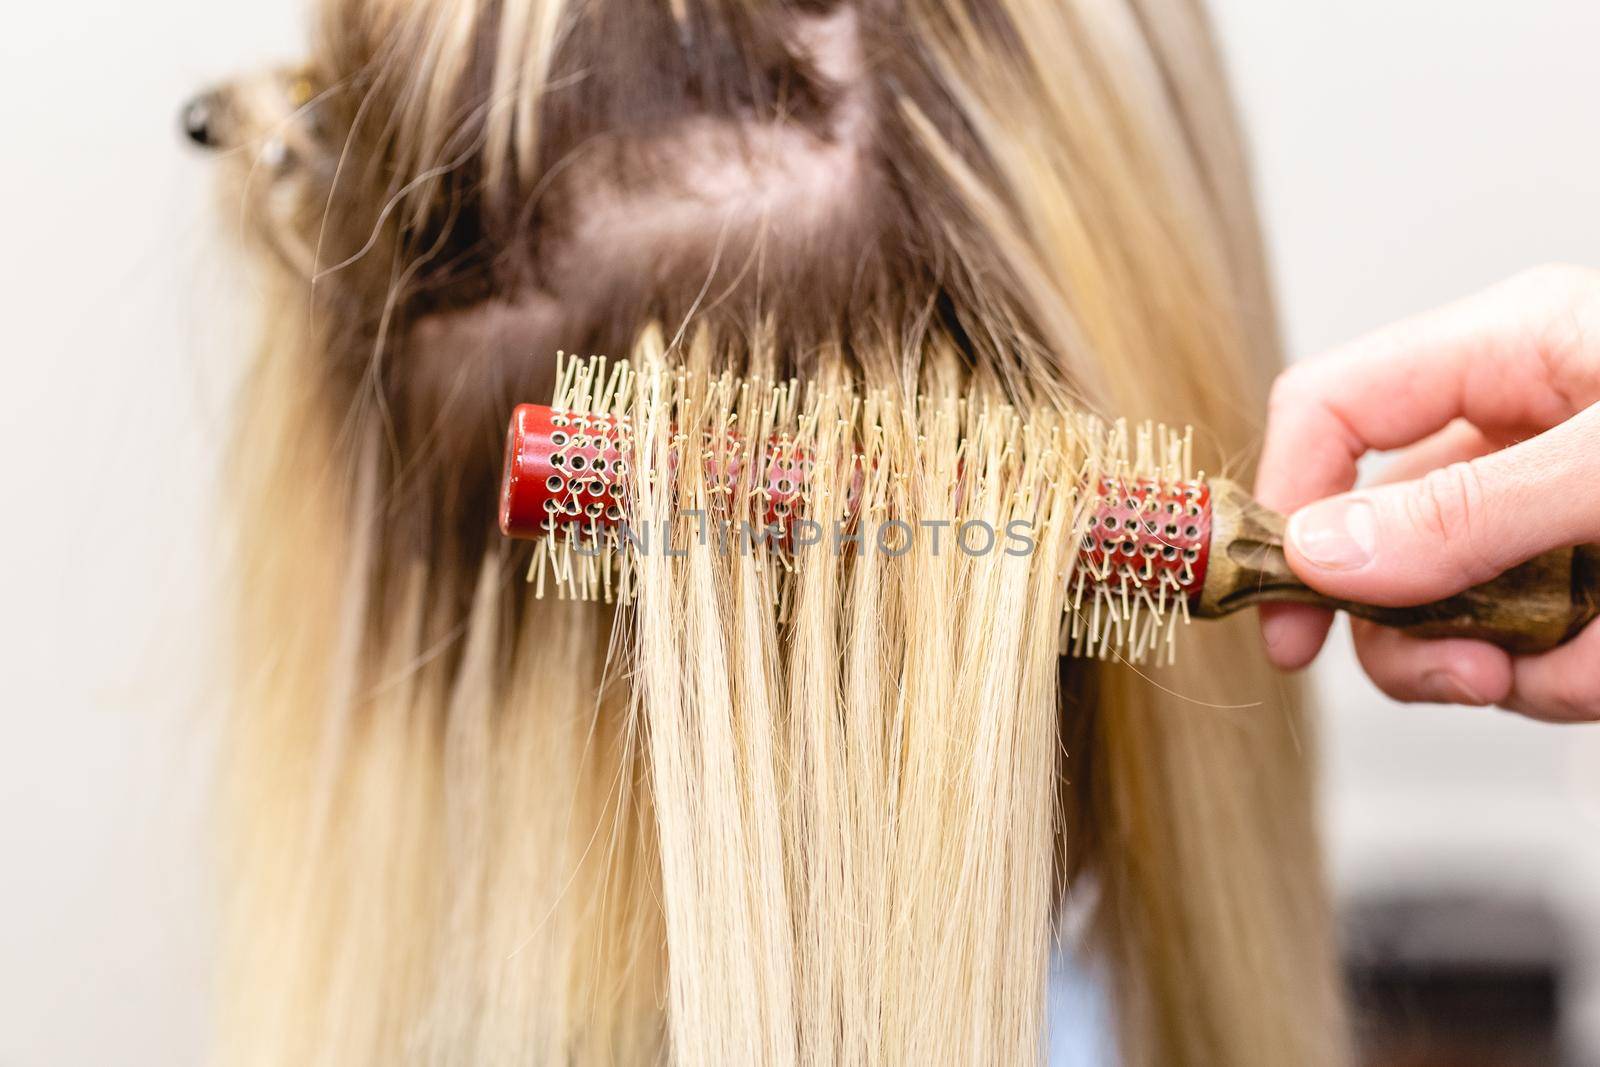 Hair extensions correction procedure. Hairdresser does hair extensions to blonde hair lady in a beauty salon